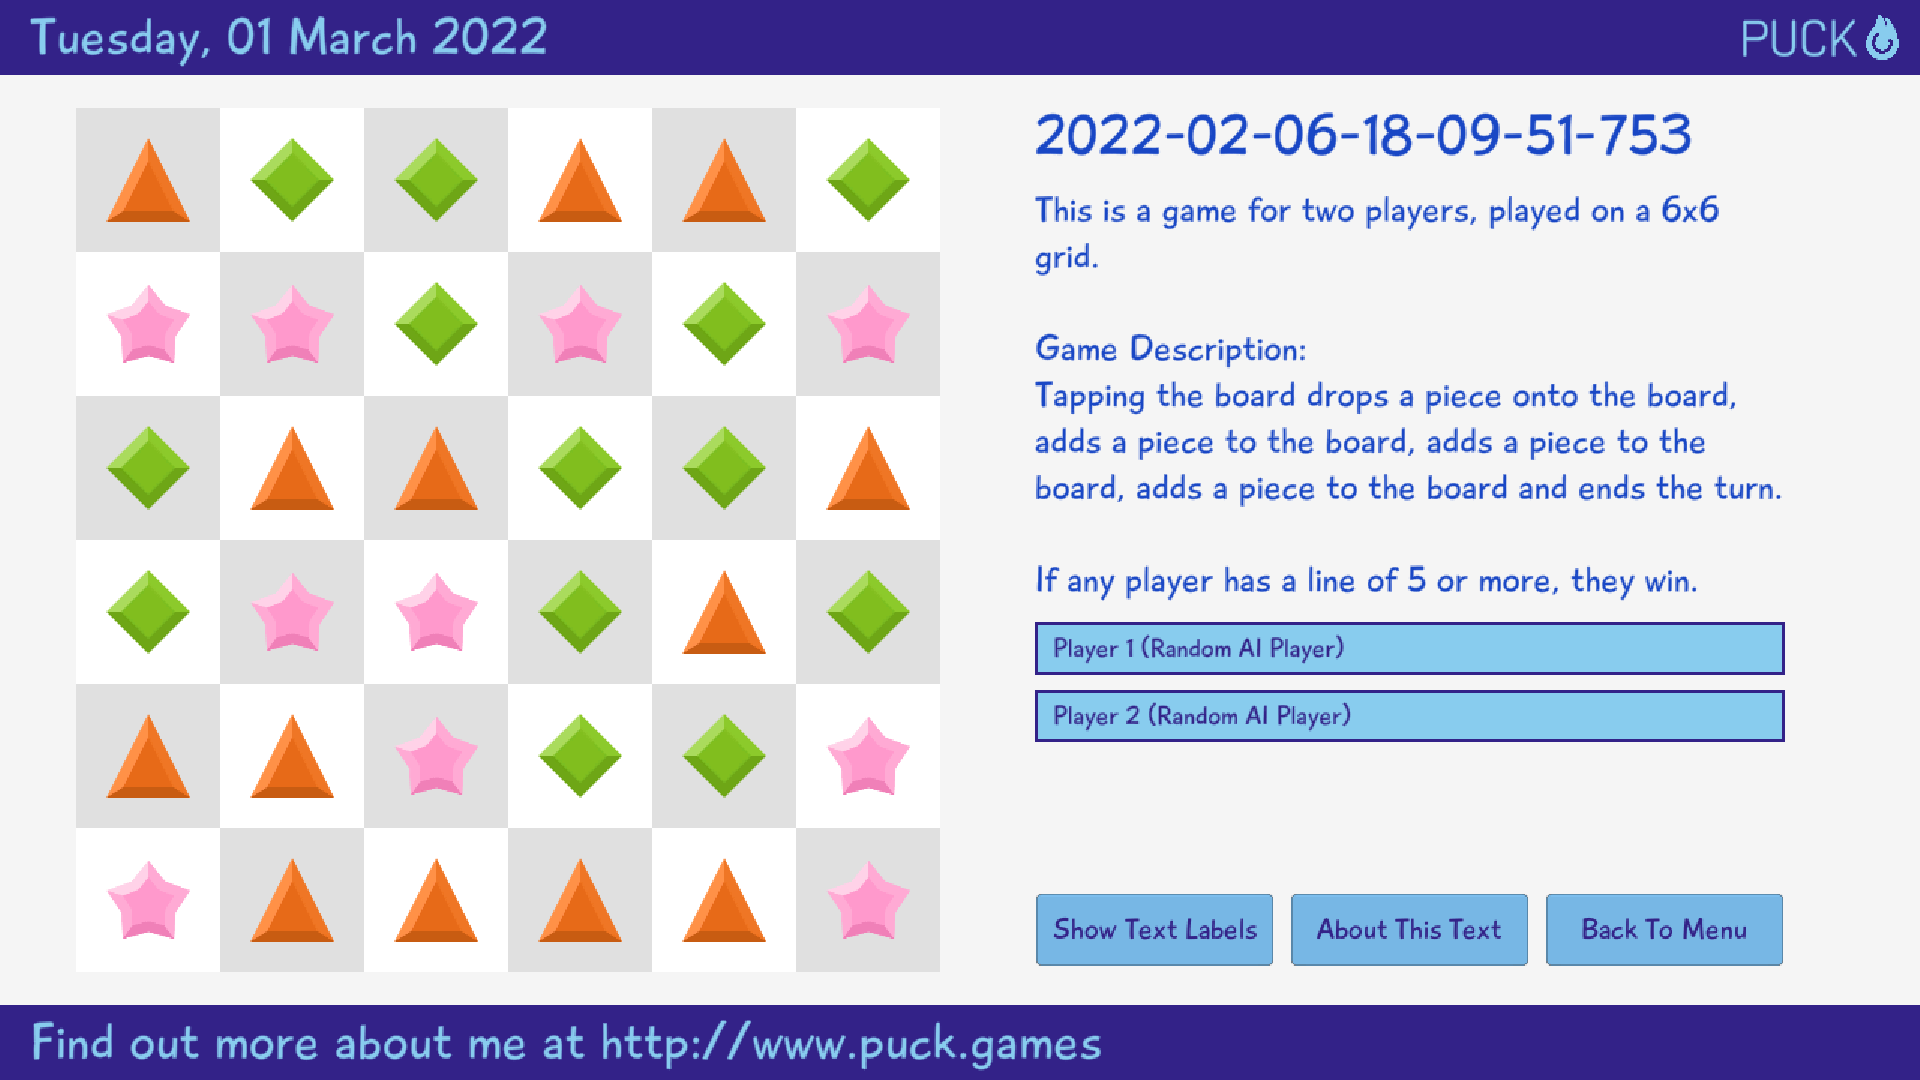 Puck's game design interface and game description. You can play Puck's games with other people, or against Puck itself.